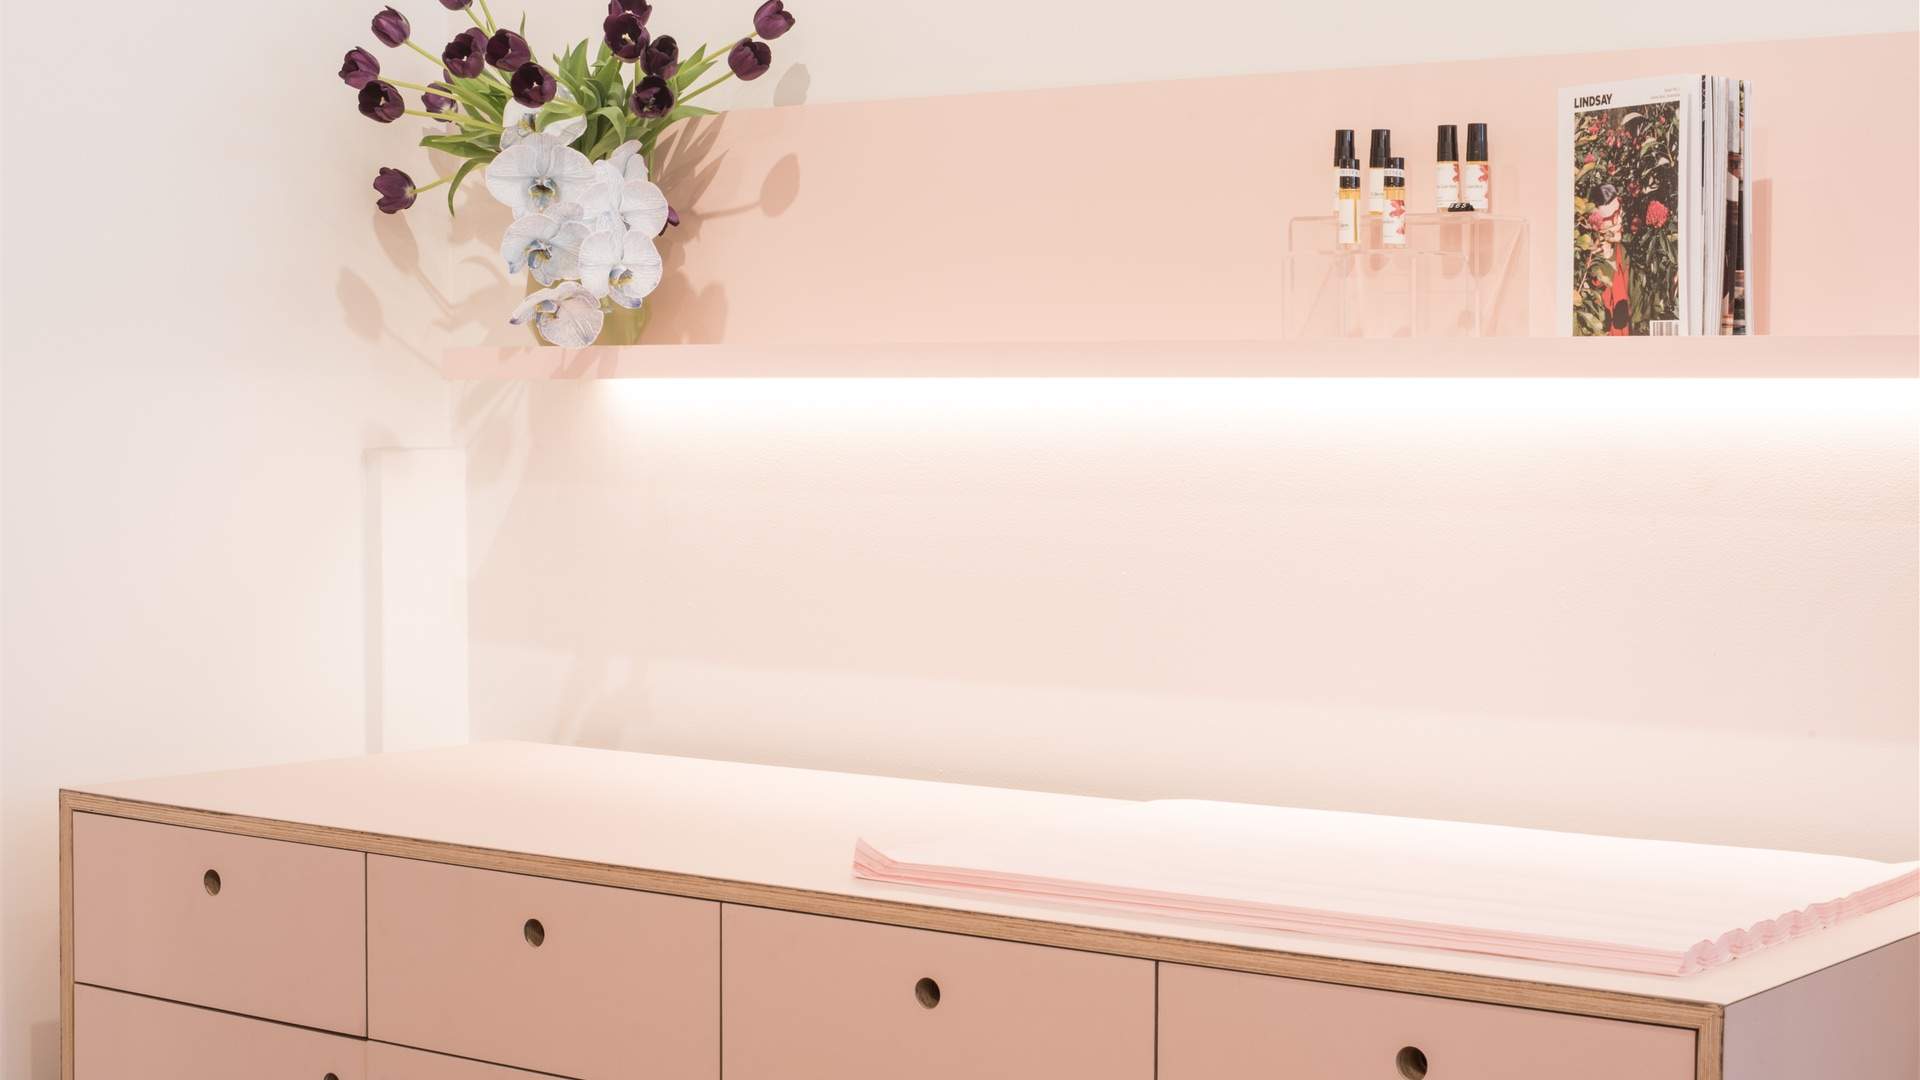 Local Label Kuwaii Has a Pretty New Pastel-Hued Home In Fitzroy